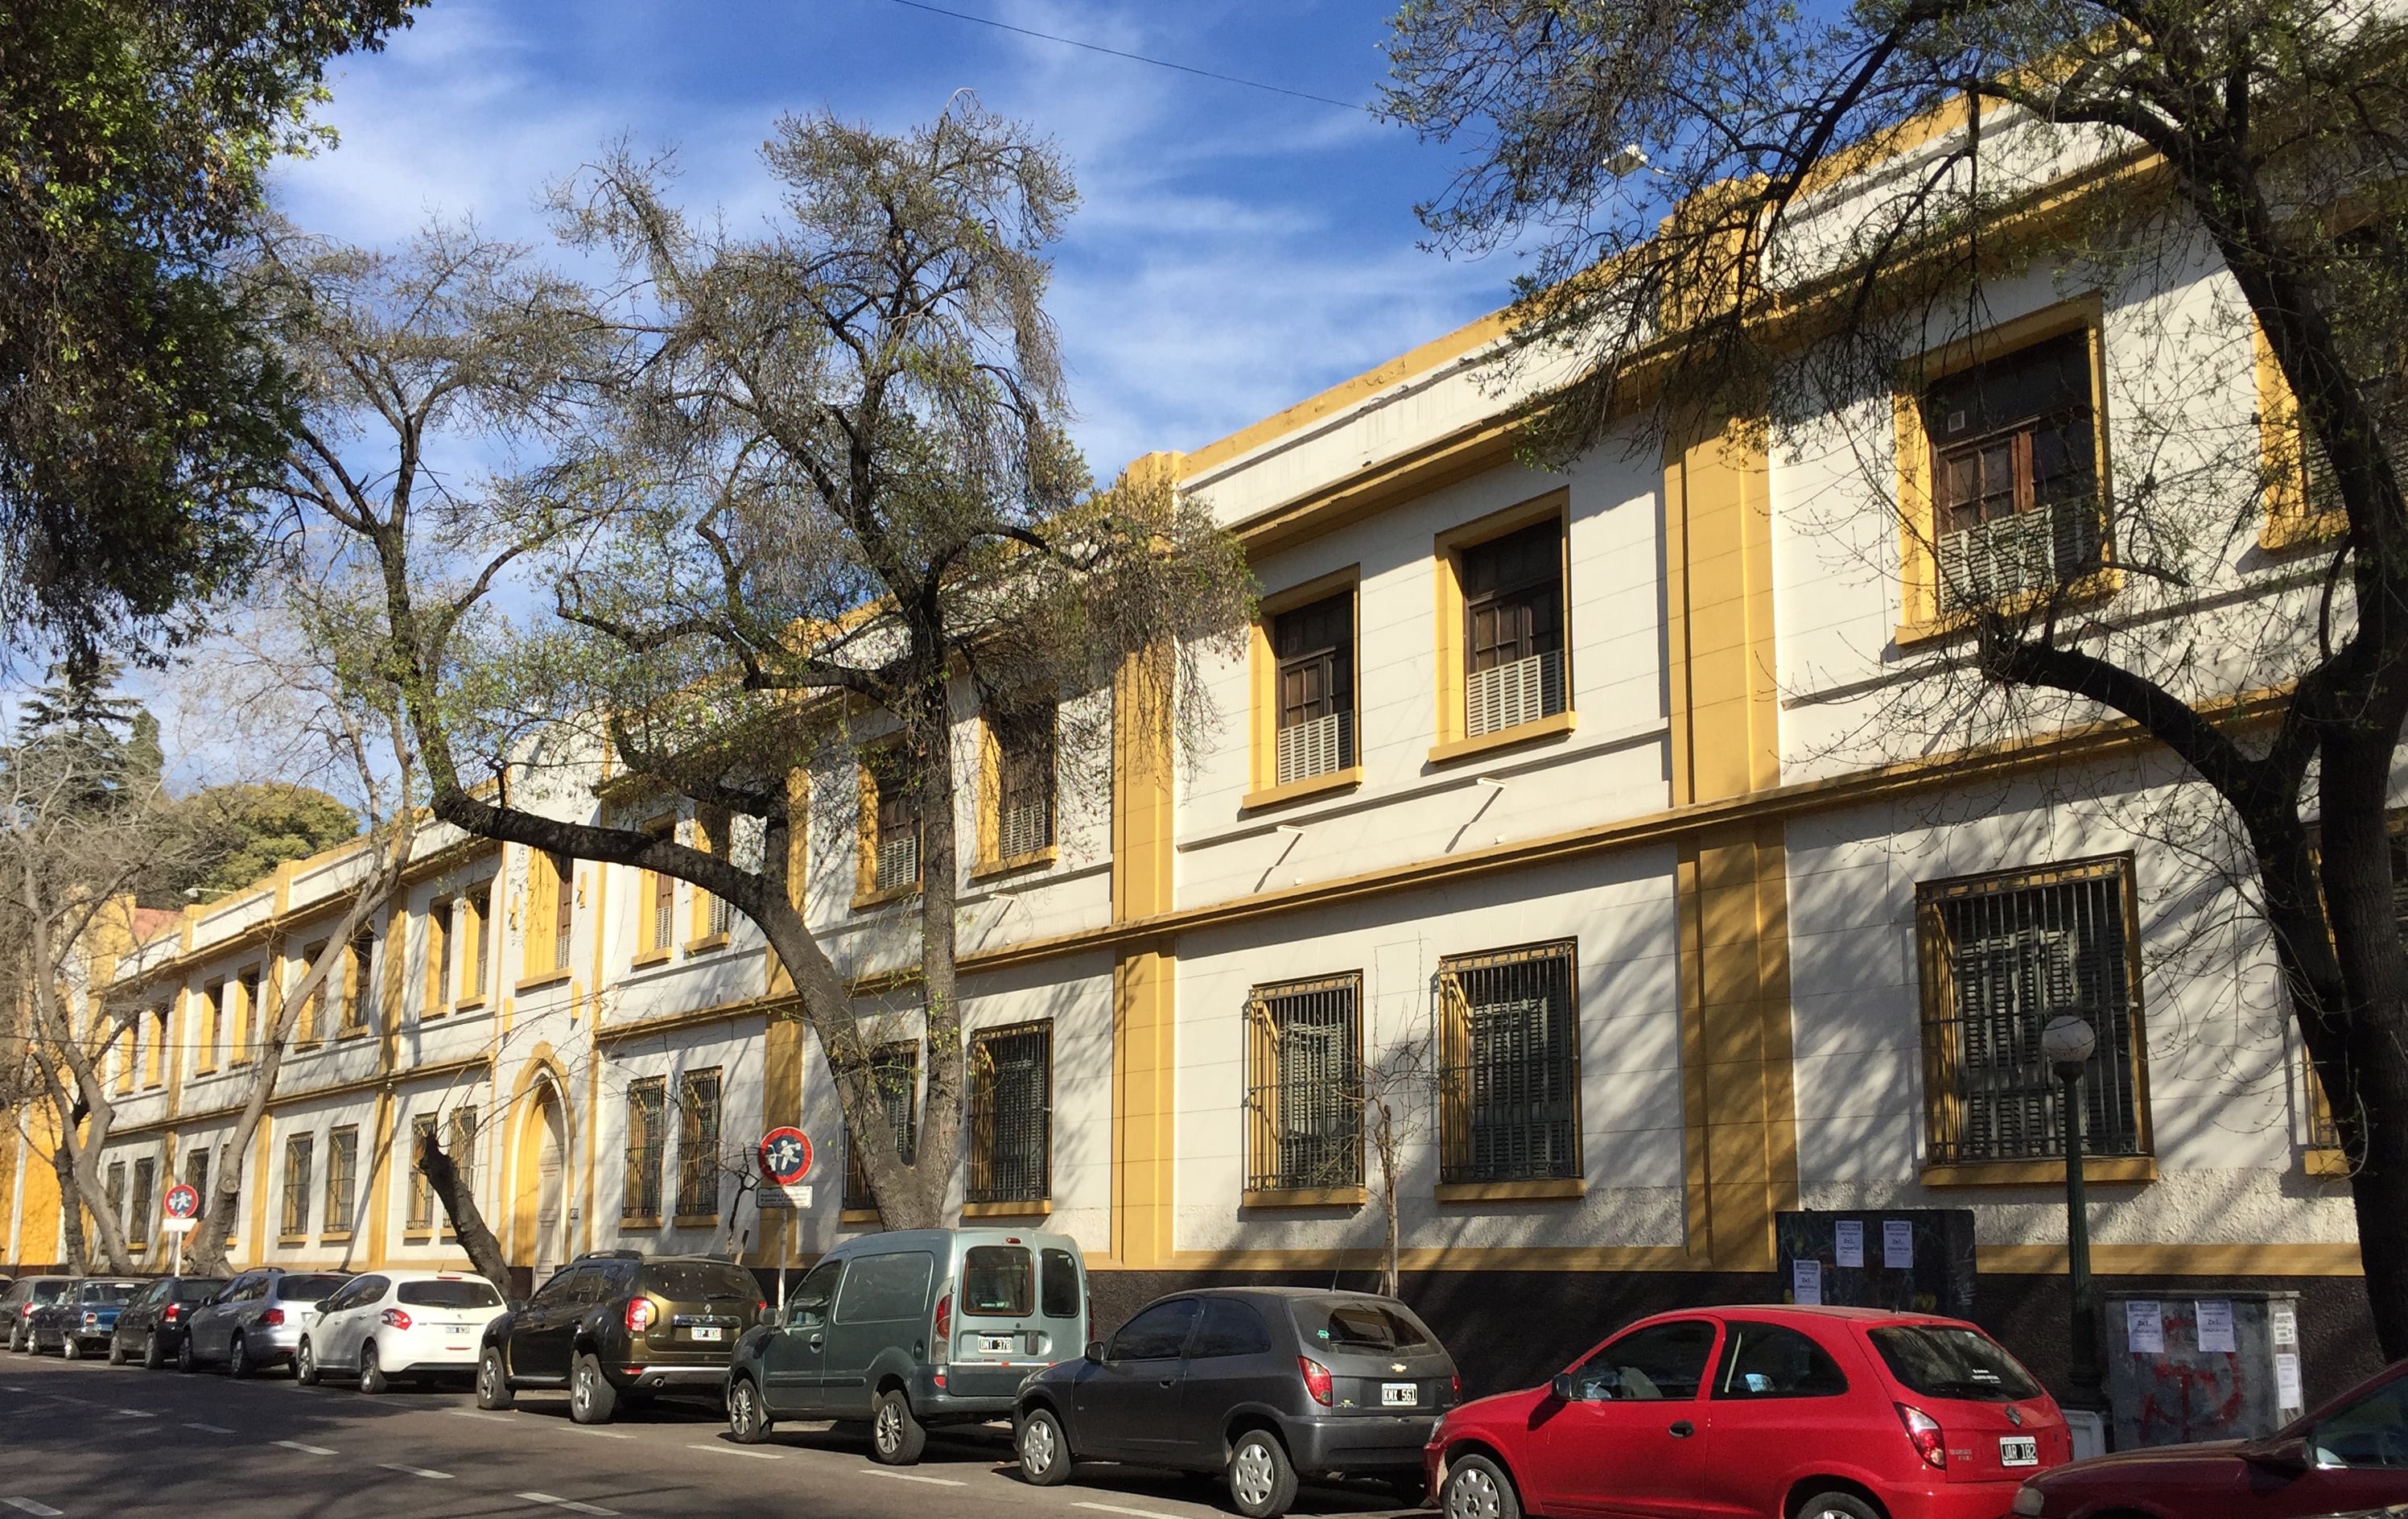 Colegio Maria Auxiliadora - Neoclassic building in Mendoza remodeled in 1934 and equipped with shutters to protect windows from dust storms